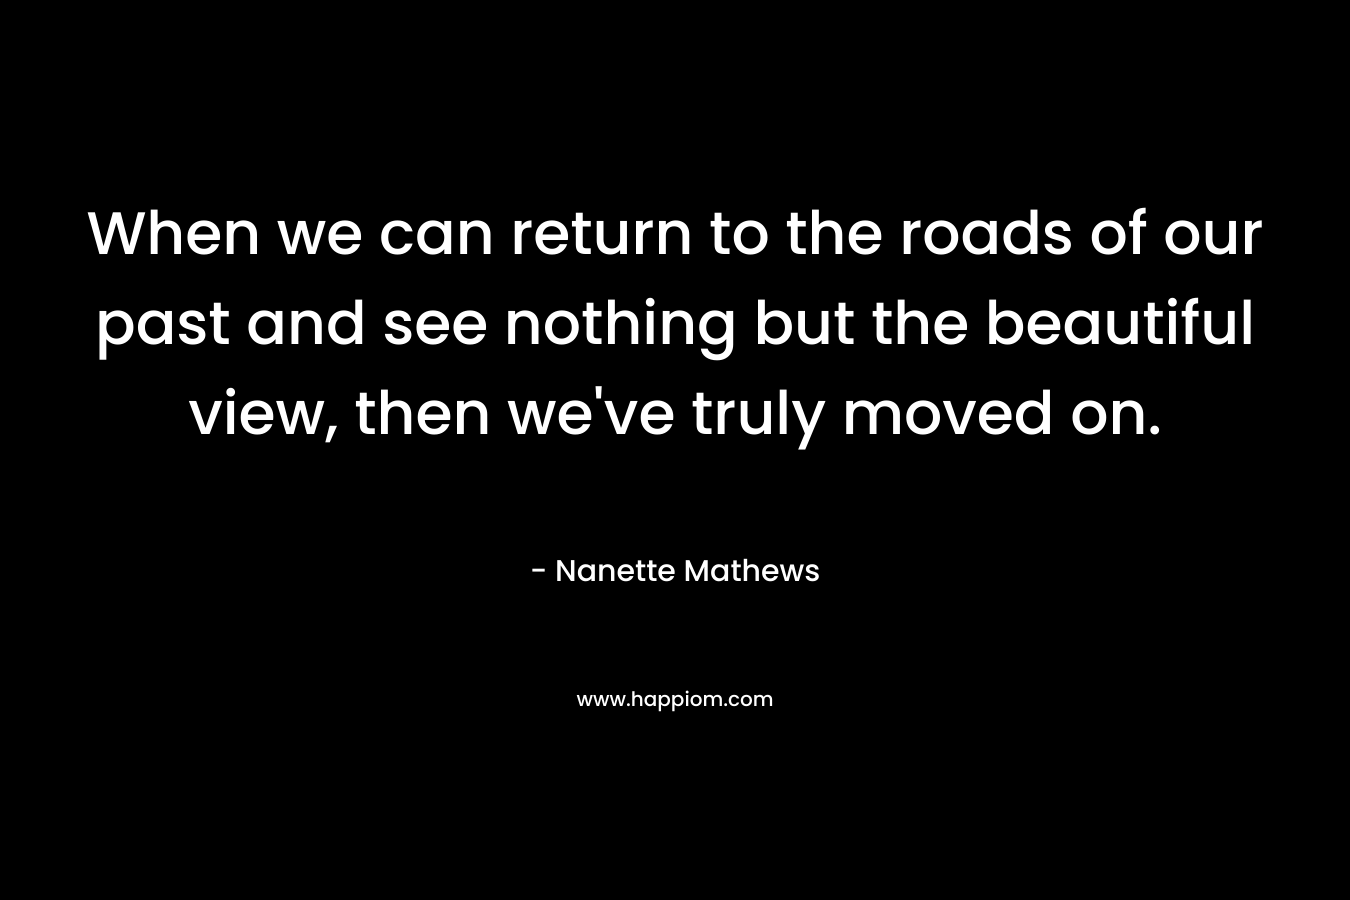 When we can return to the roads of our past and see nothing but the beautiful view, then we've truly moved on.